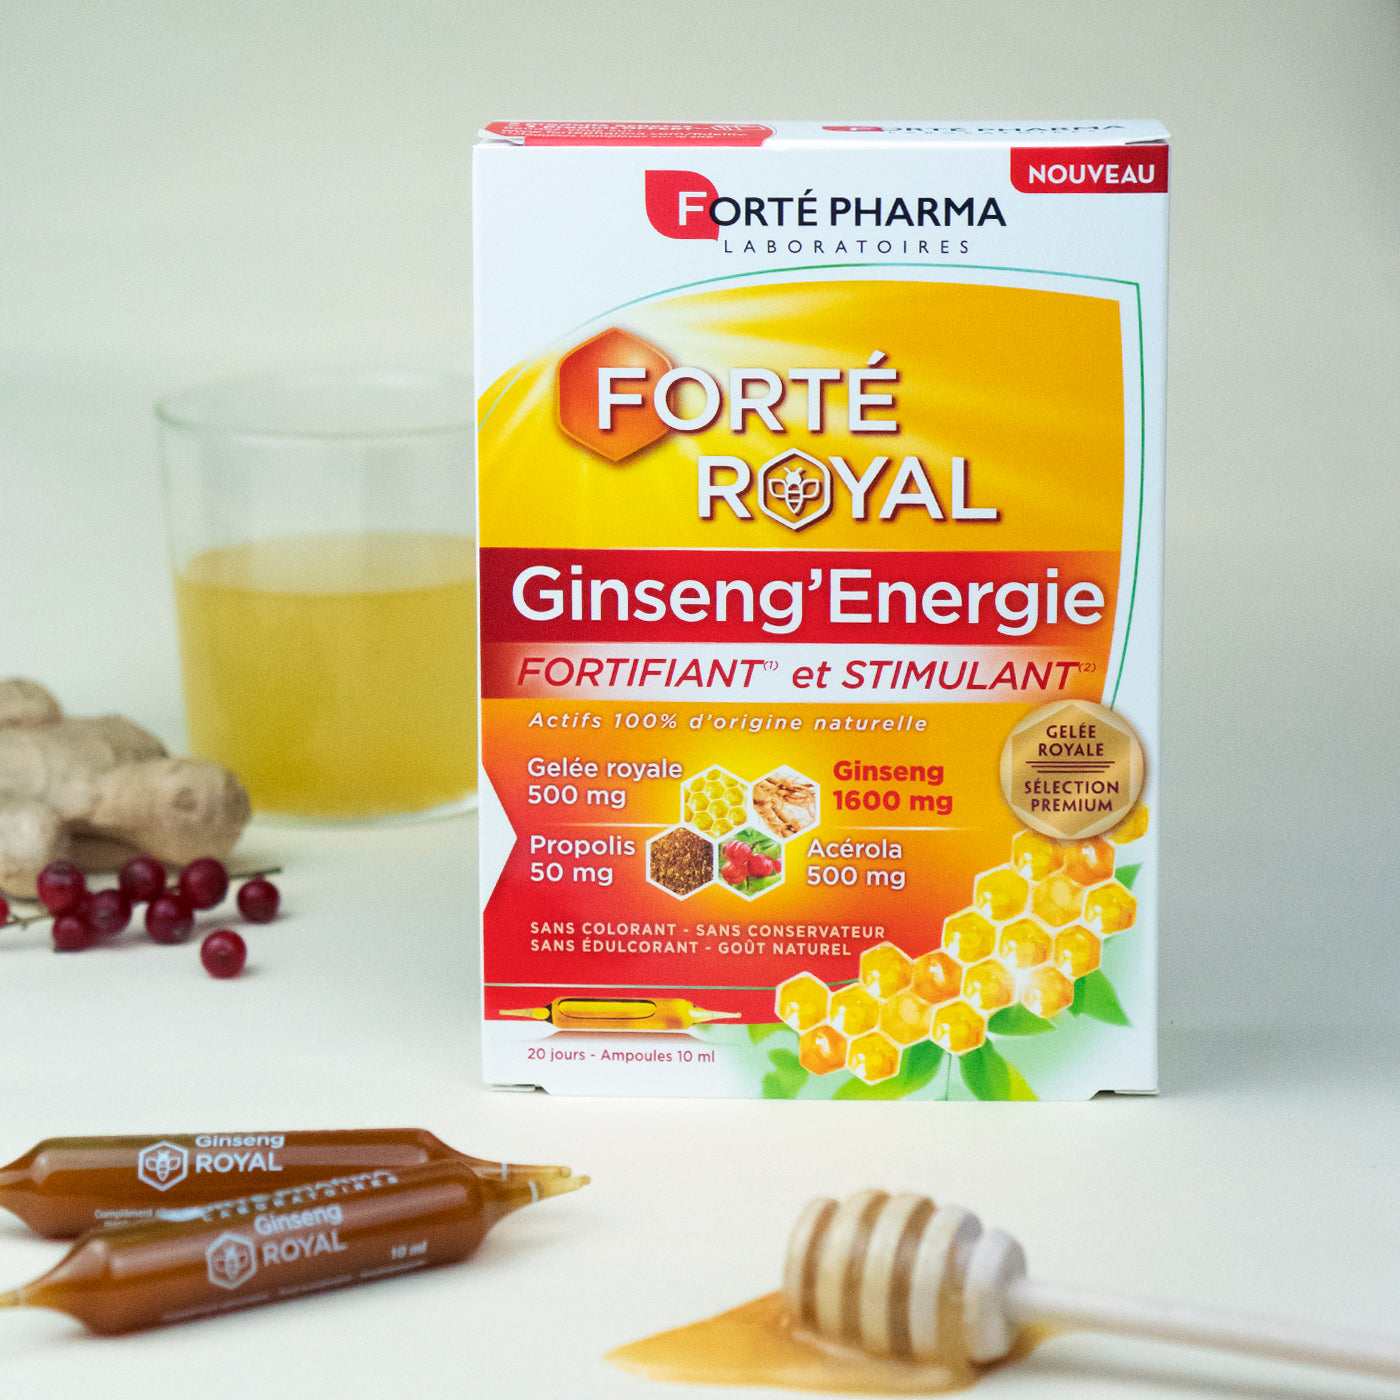 Forté Royal Ginseng'Energie